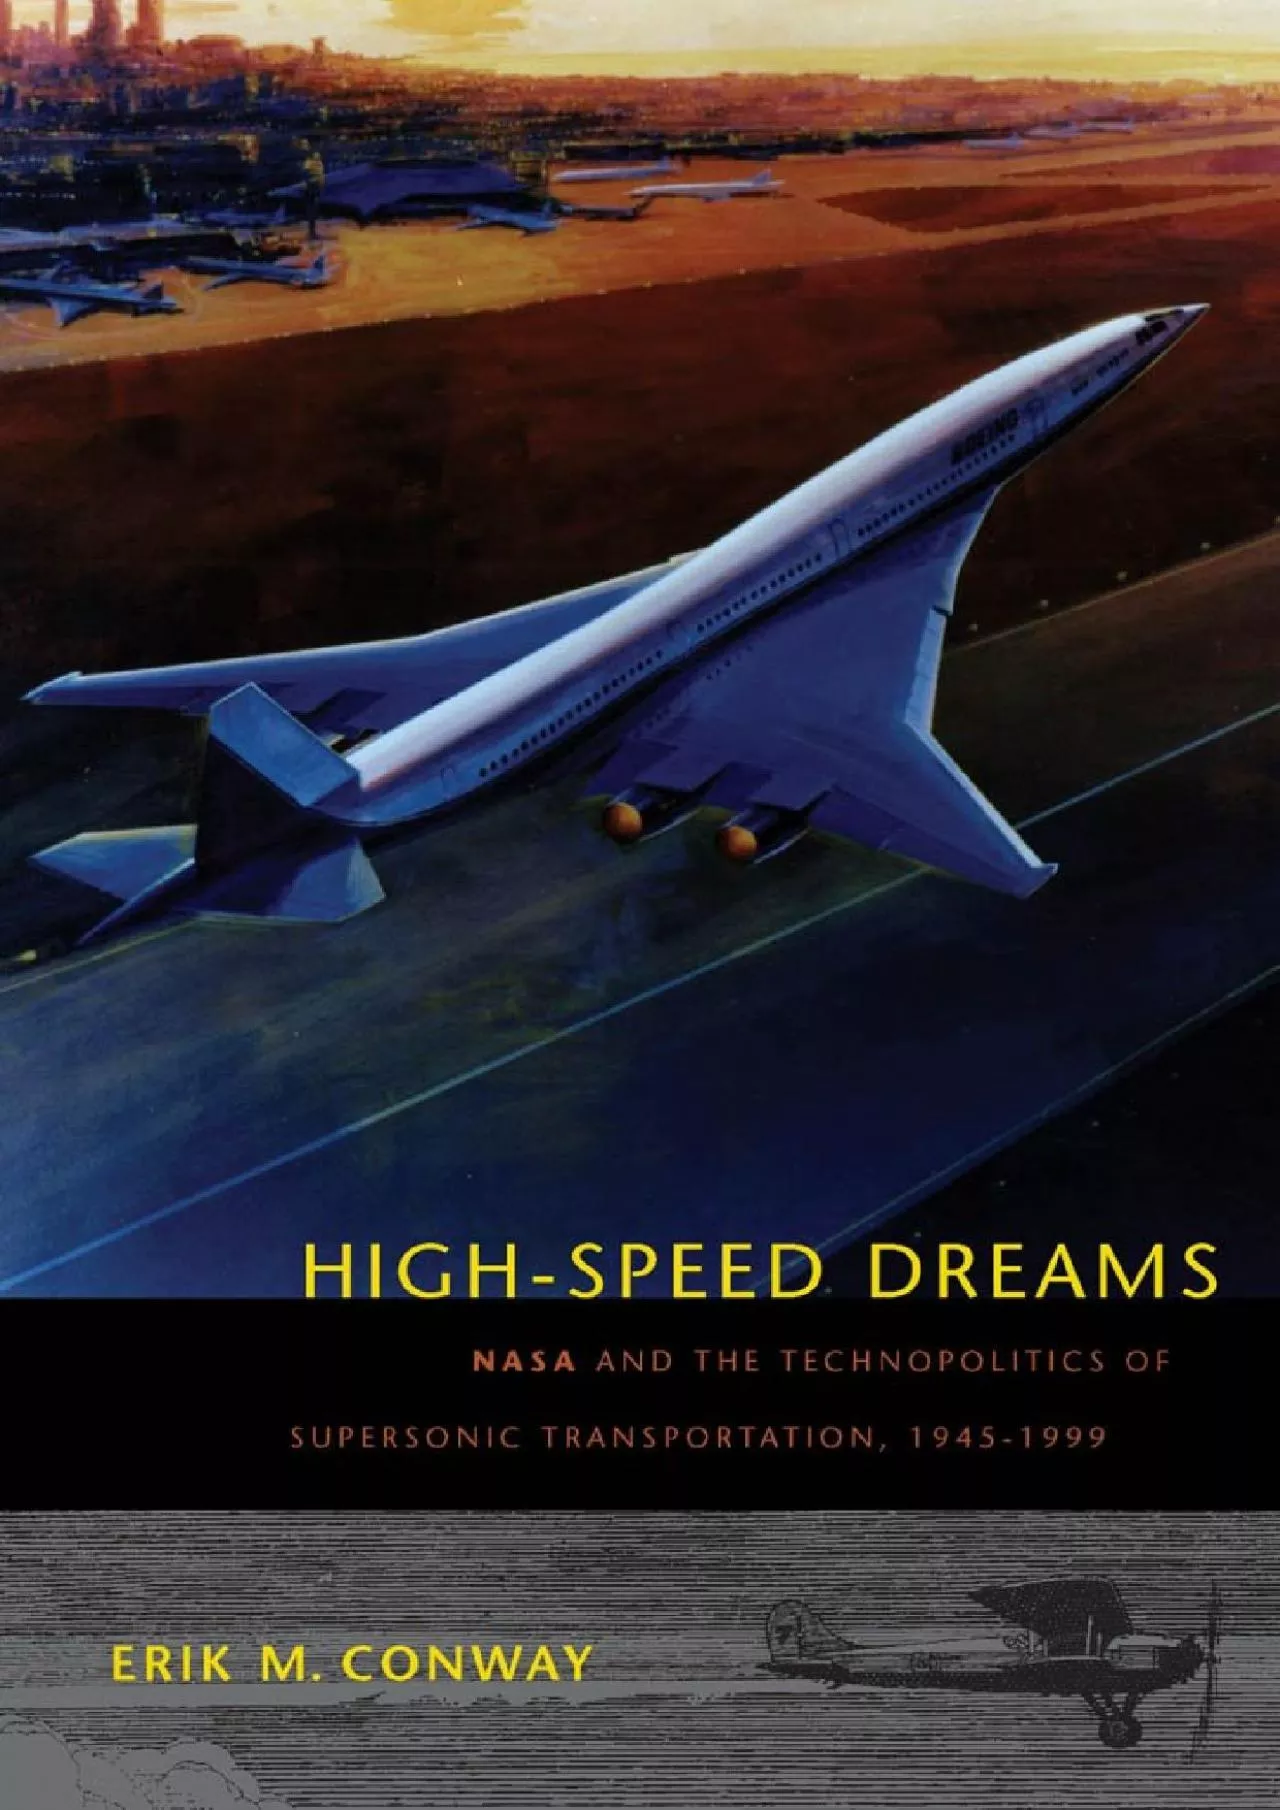 (BOOK)-High-Speed Dreams: NASA and the Technopolitics of Supersonic Transportation, 1945-1999